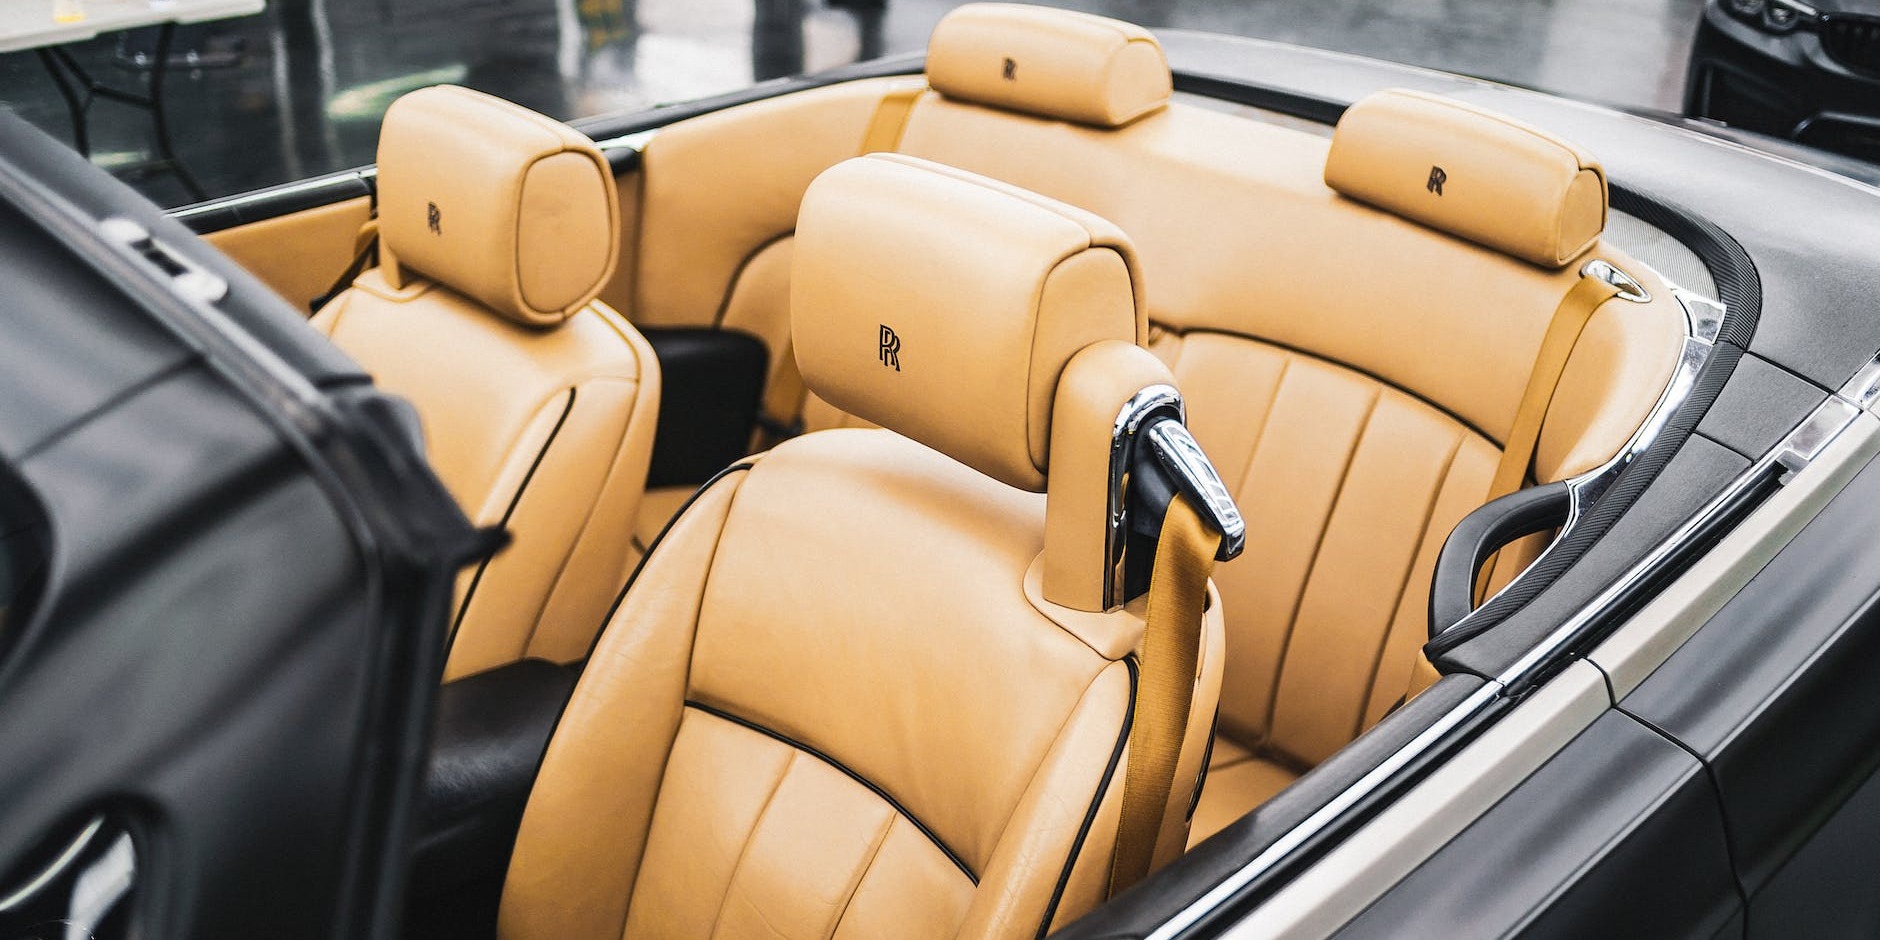 Experience Ultimate Luxury: What Makes the Rolls Royce Phantom the Perfect Wedding Car?